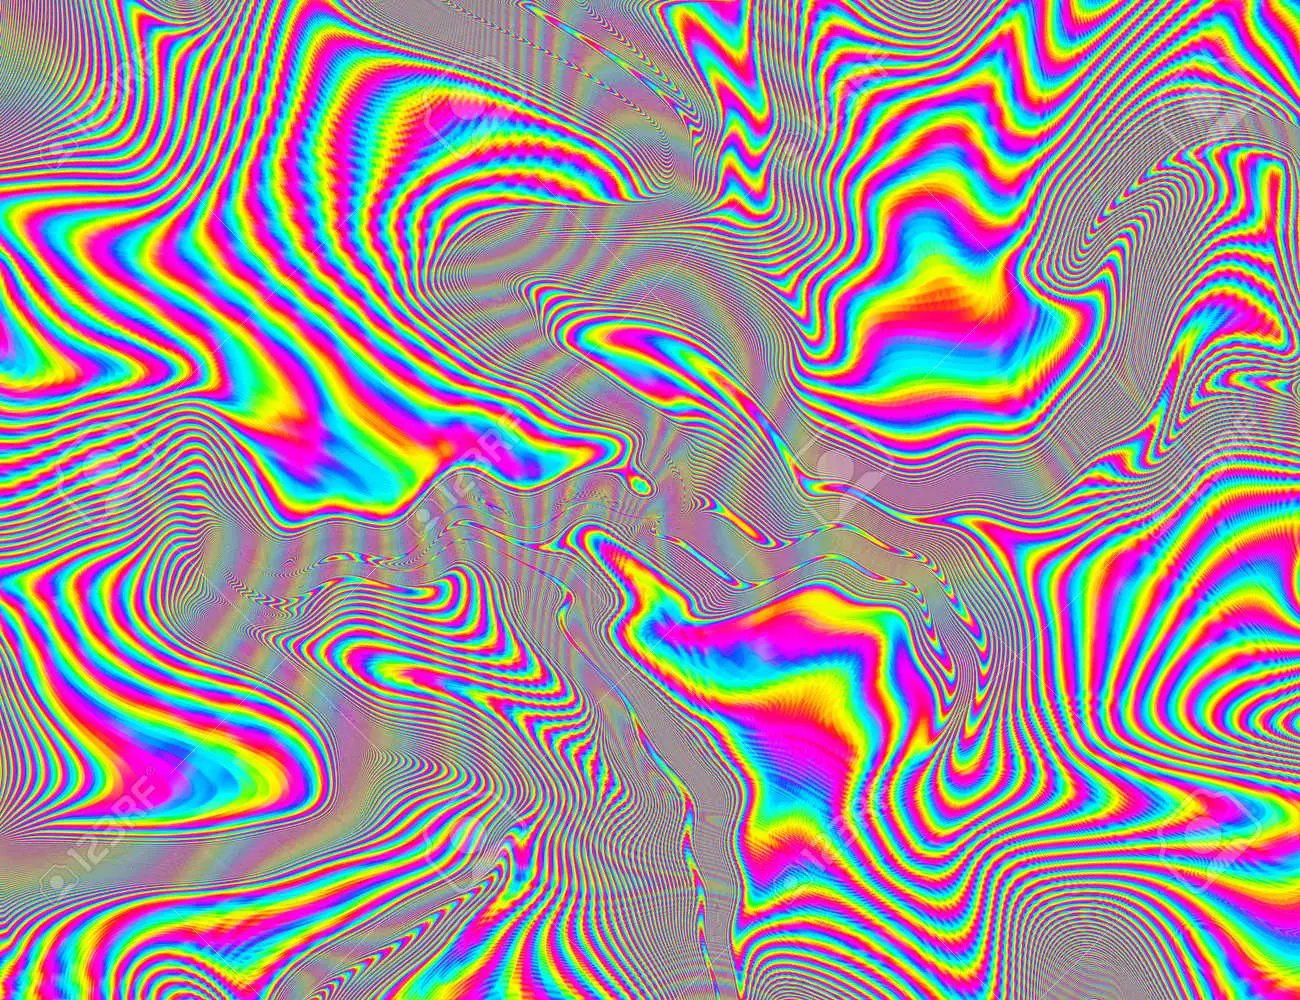 Hippie trippy psychedelic rainbow background lsd colorful wallpaper abstract hypnotic illusion hippie retro texture glitch and disco stock photo picture and royalty free image image